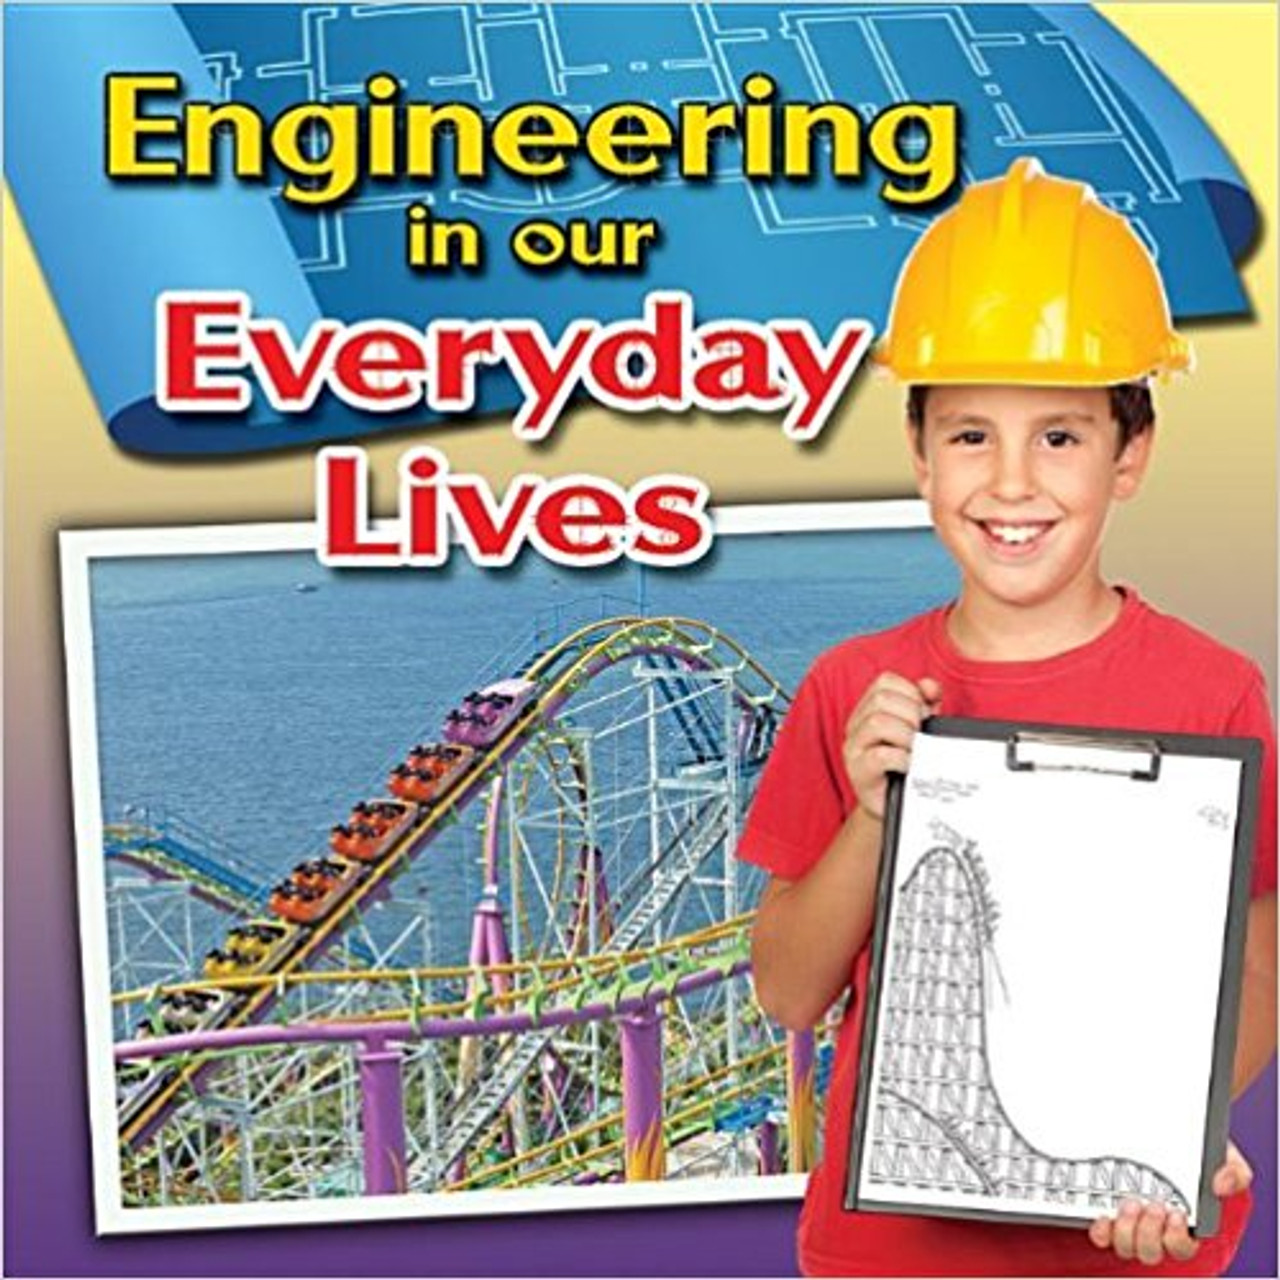 Engineering in Our Everyday Lives (Paperback) by Reagan Miller